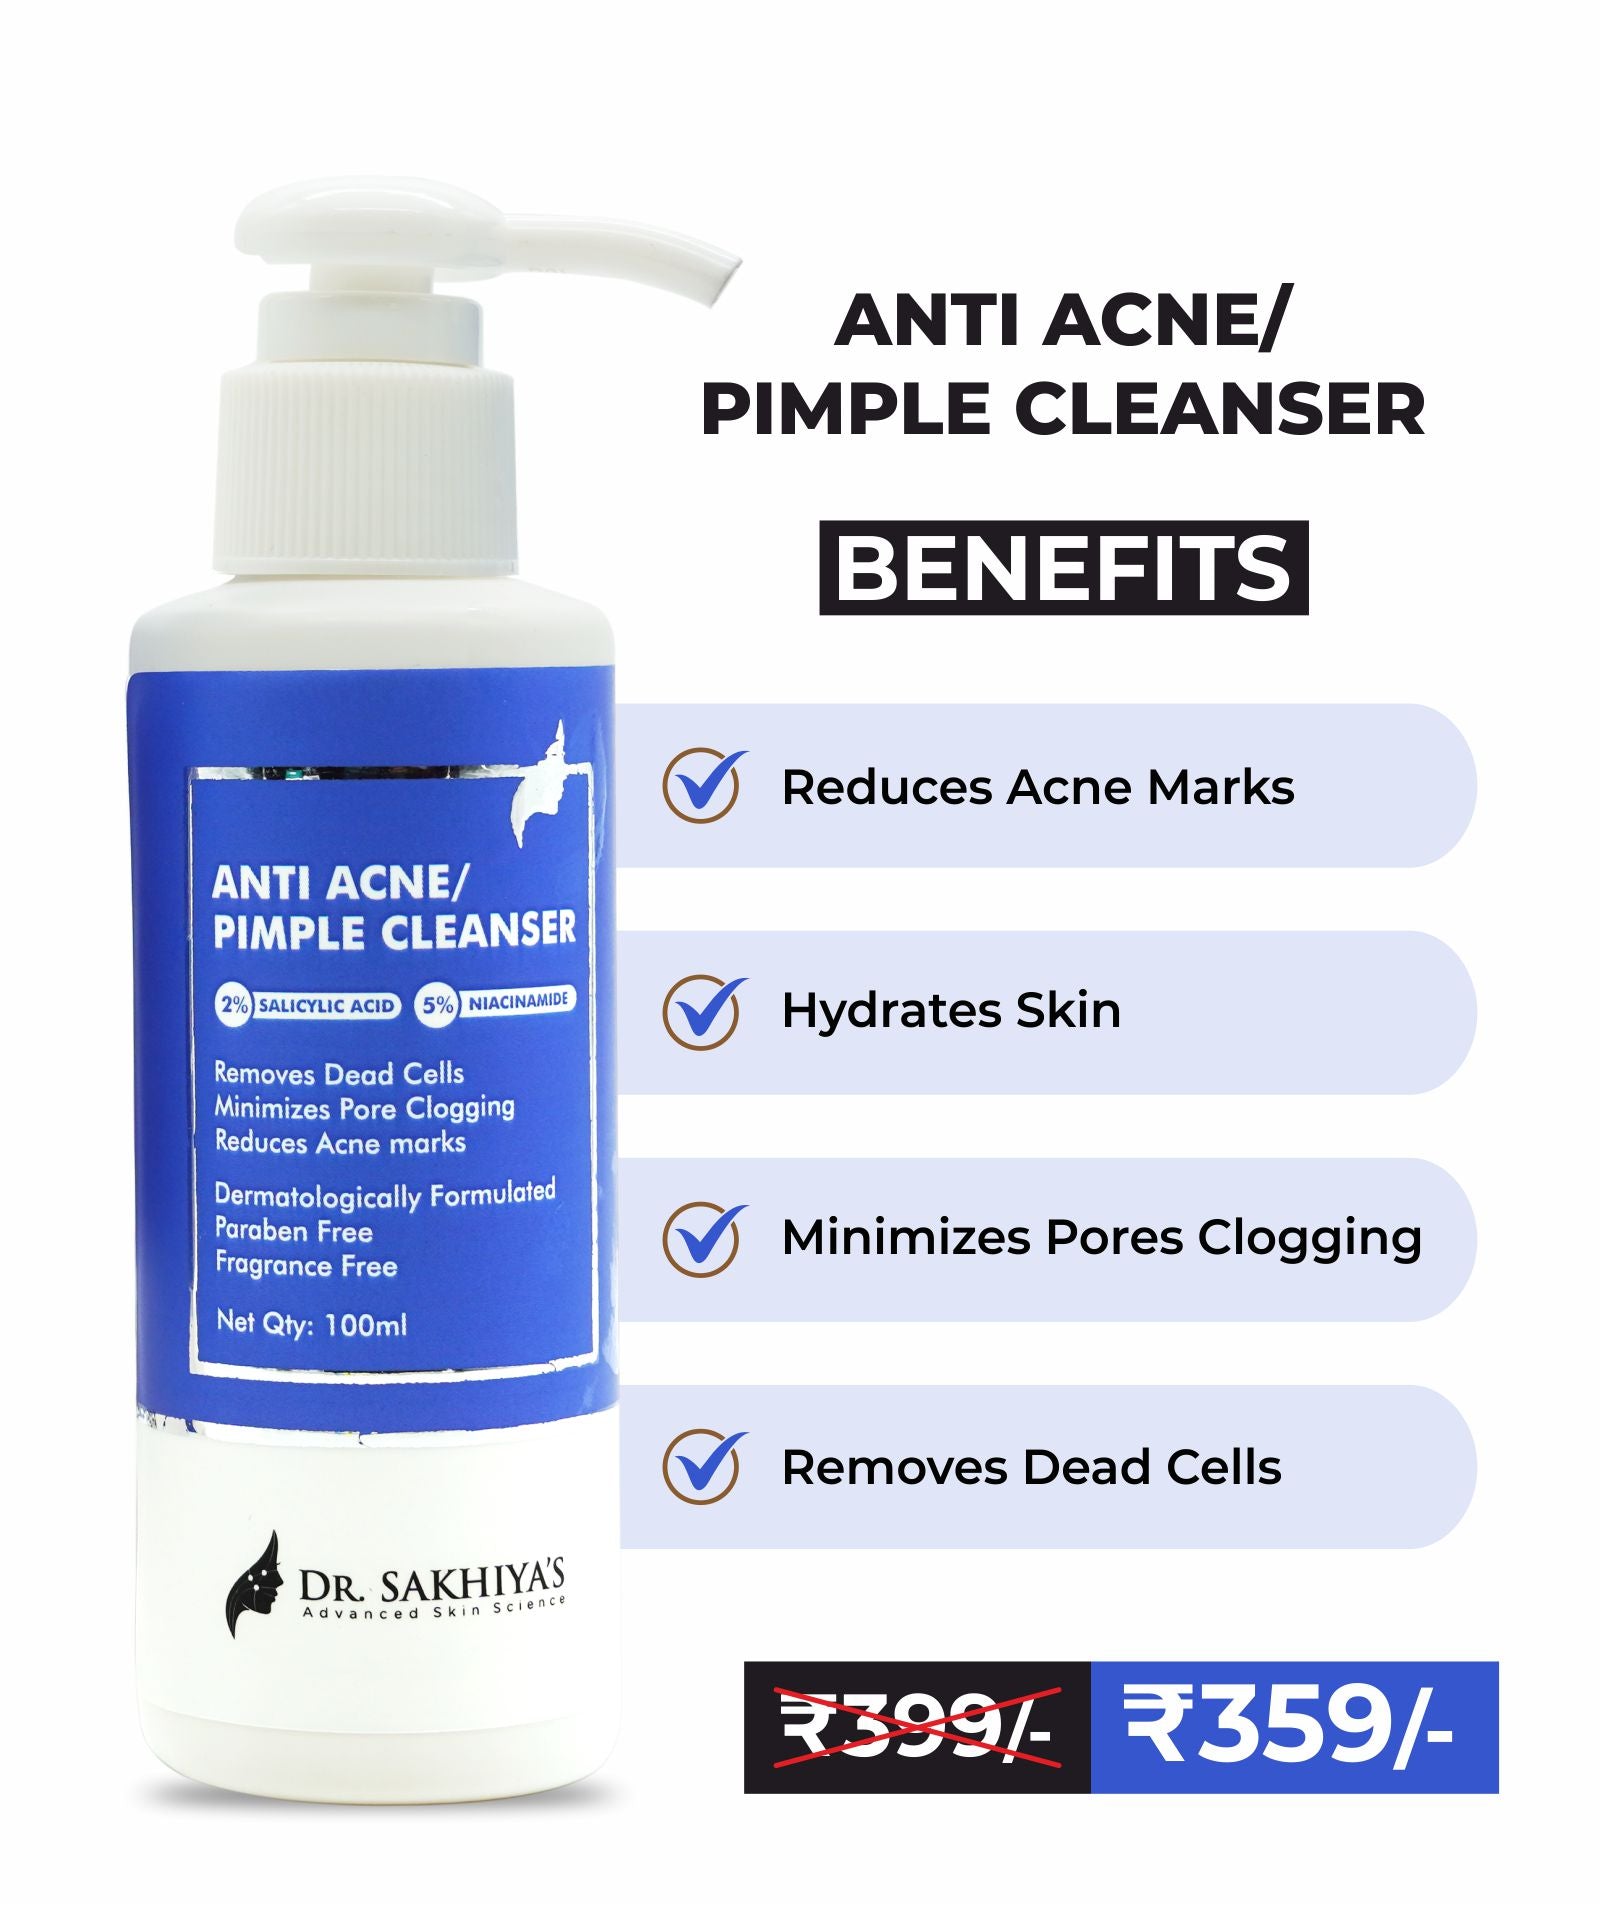 Anti Acne/Pimple Face Cleanser - With 2% Salicylic Acid And 5% Niacinamide